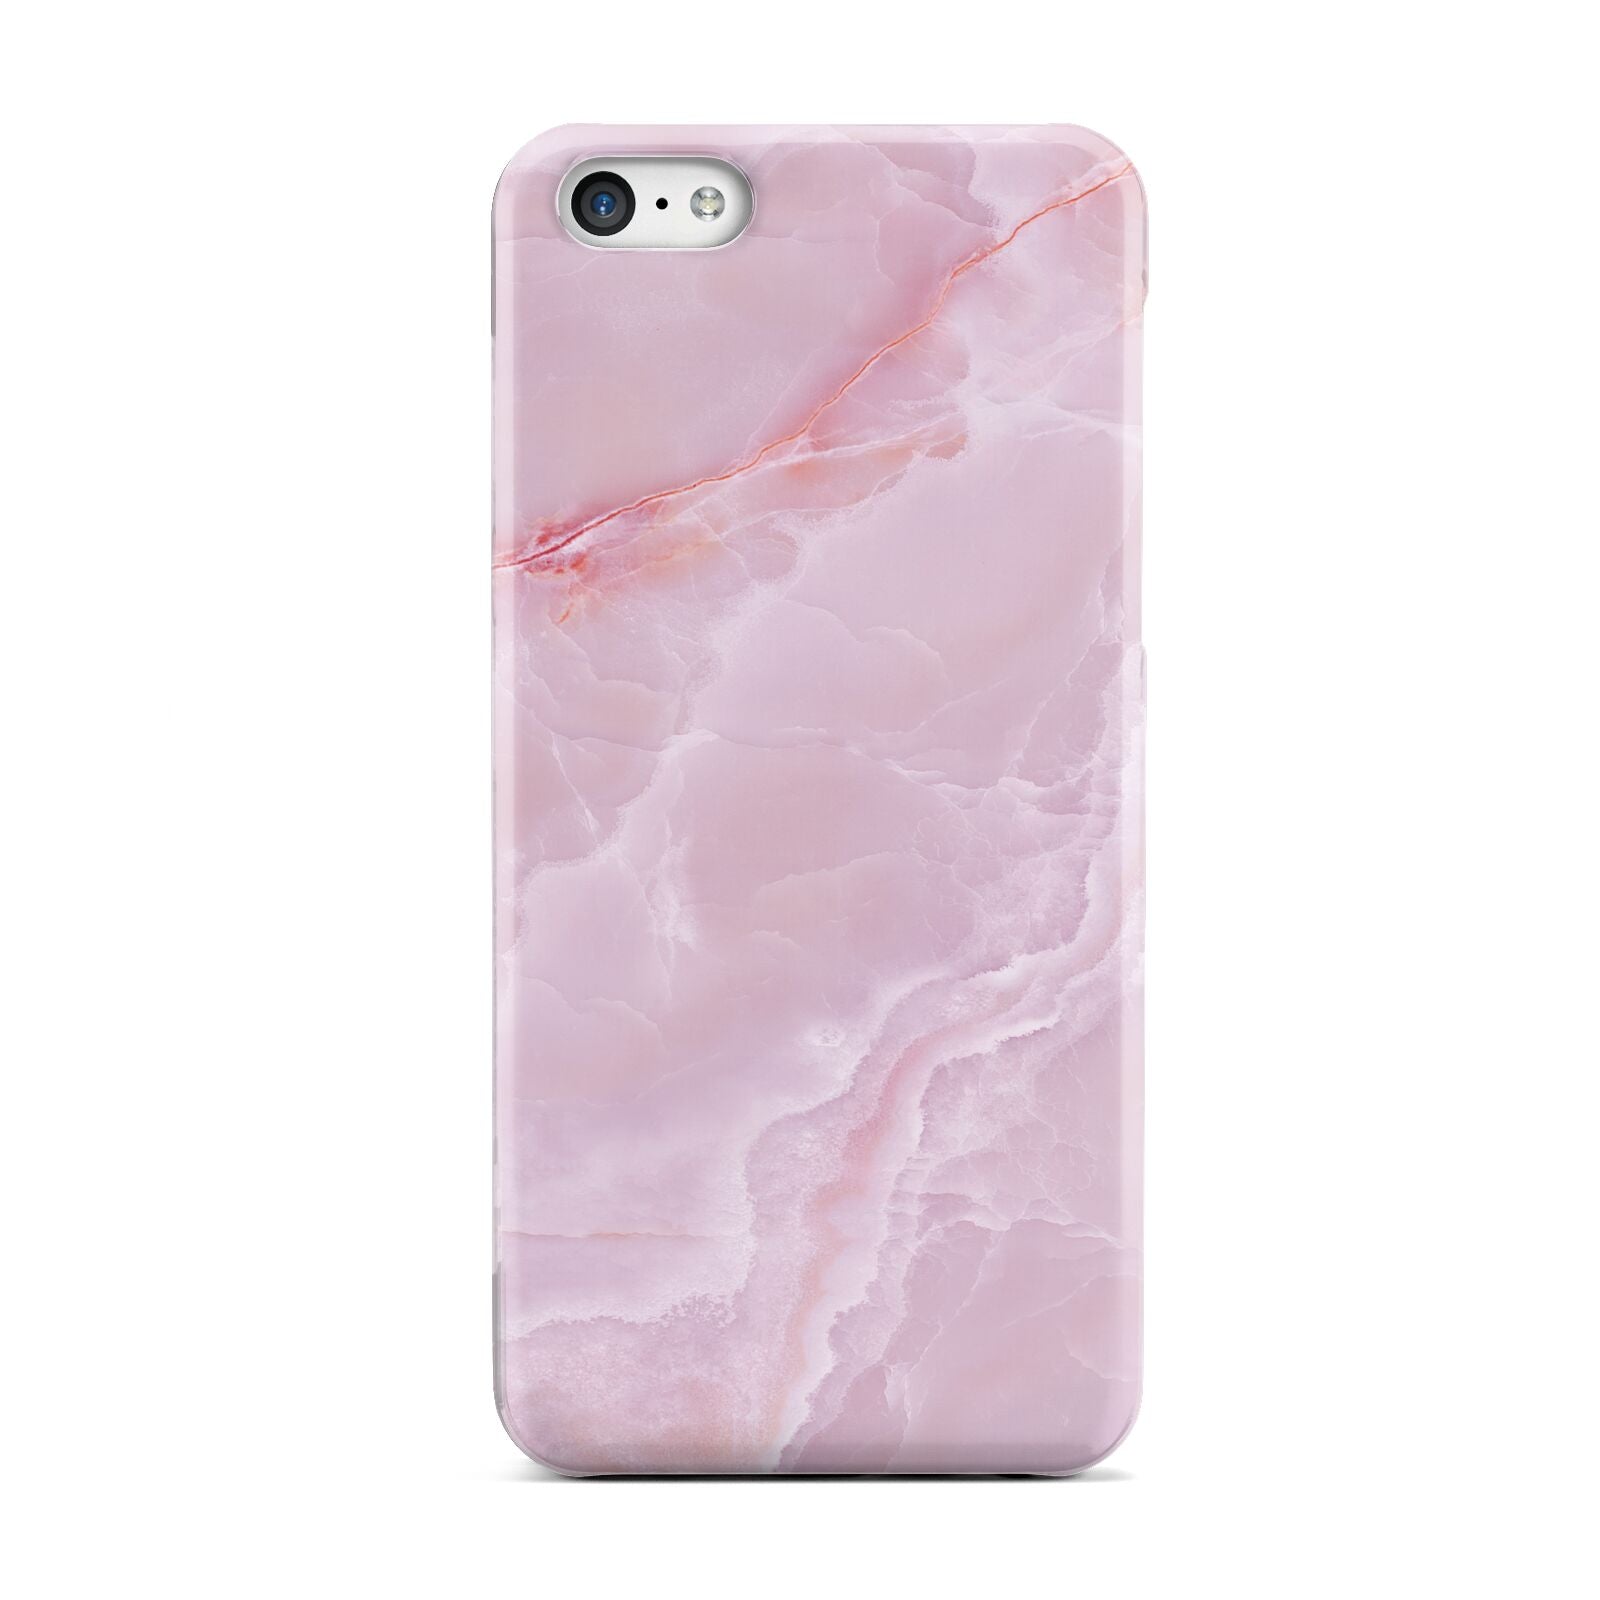 Dreamy Pink Marble Apple iPhone 5c Case